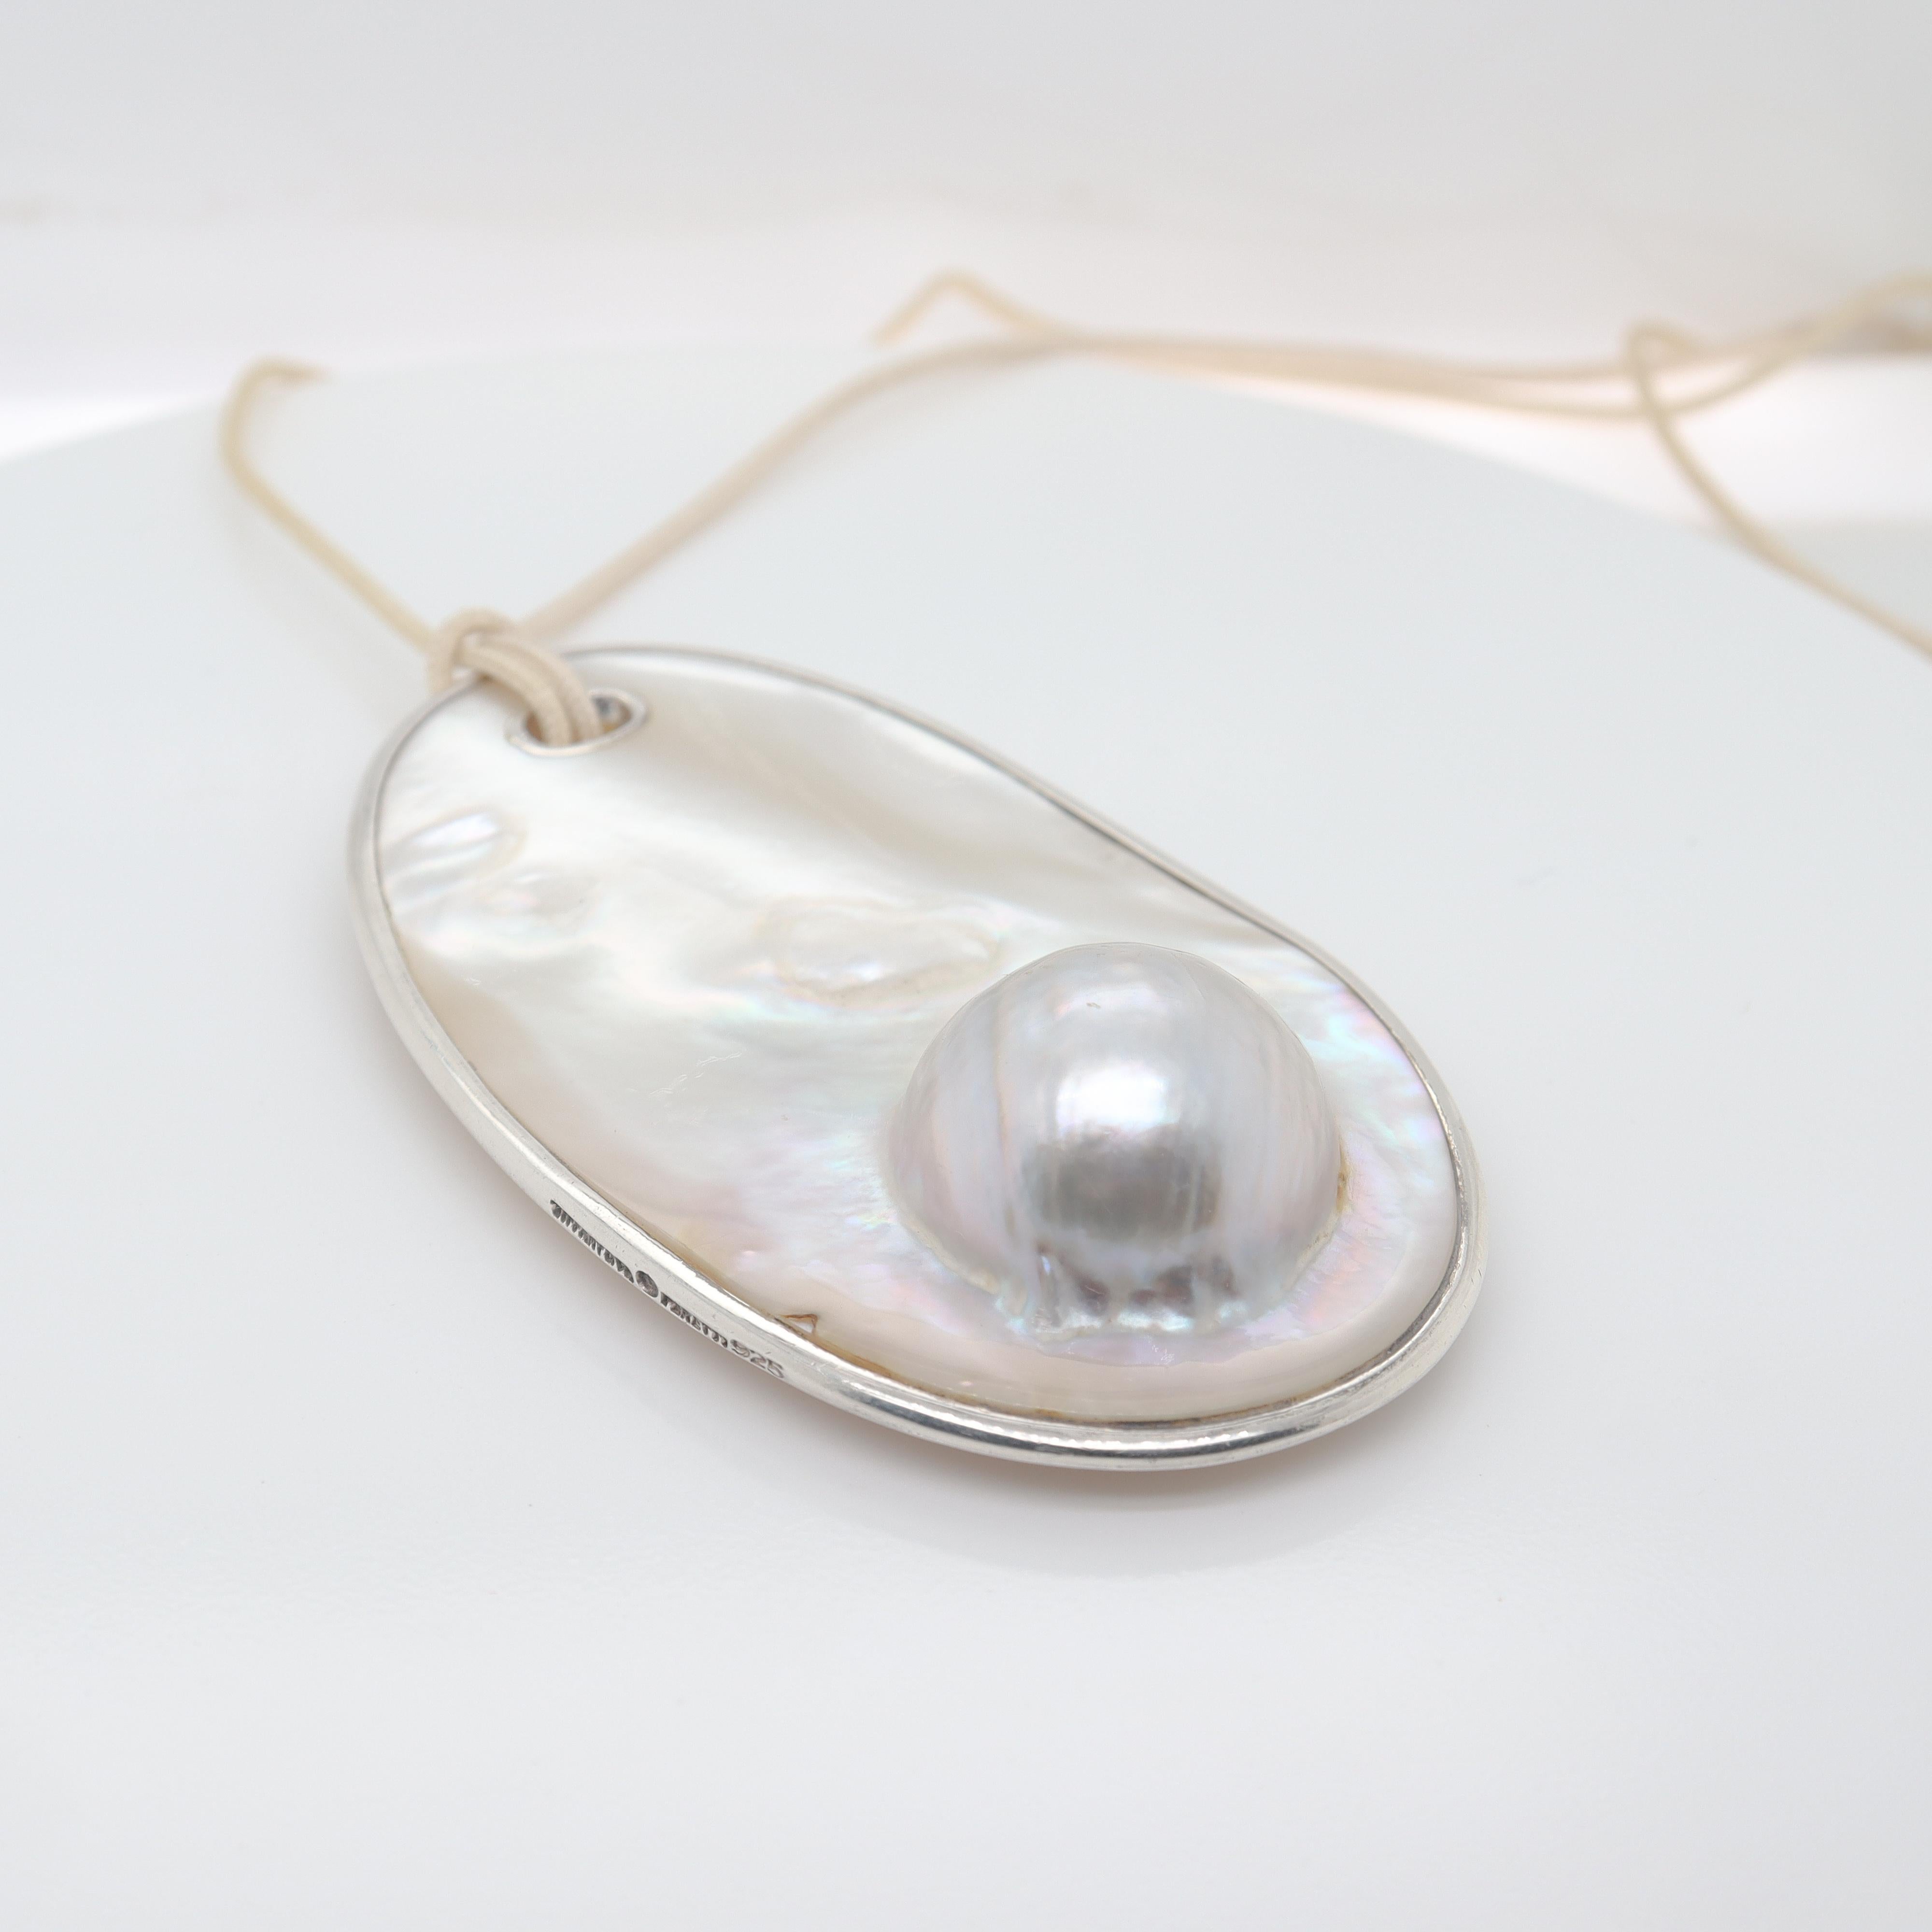 A fine silver & blister pearl necklace.

Designed by Elsa Peretti for Tiffany & Co. 

Comprised of a large blister pearl disc mounted with a sterling silver rim and set with a silver eyelet. 

Together with a white nylon cord.

Simply wonderful